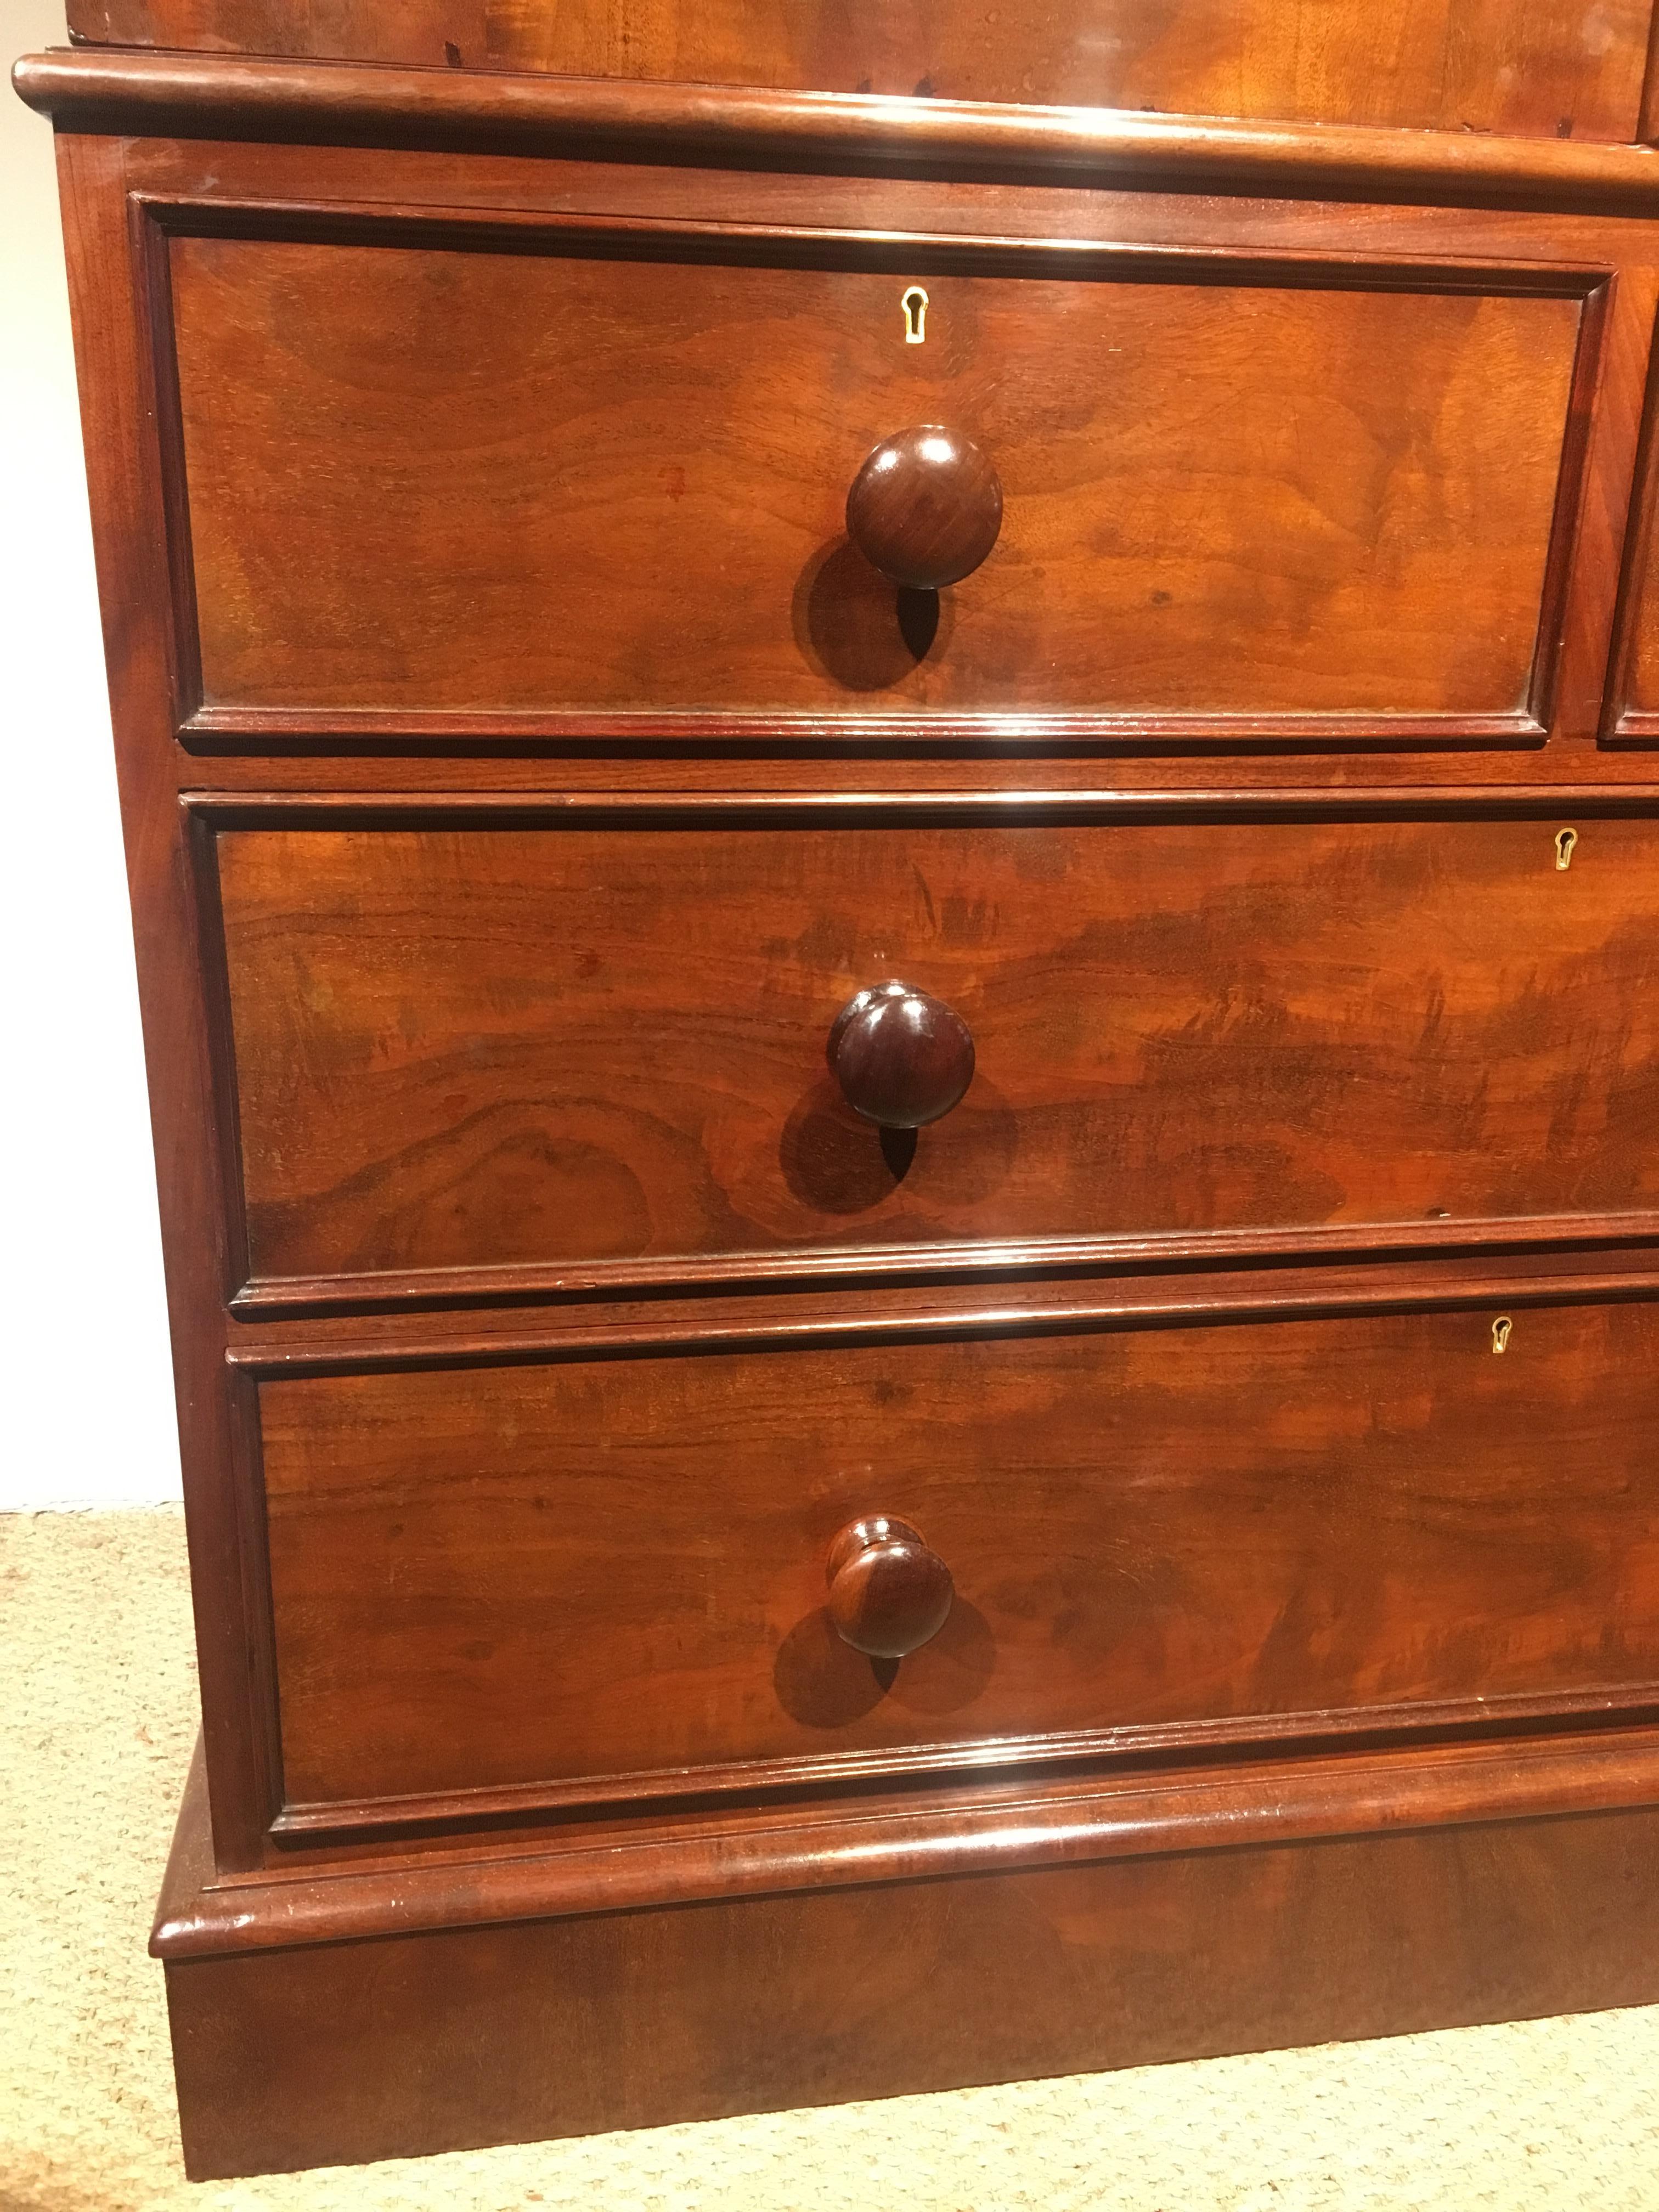 English dating to circa 1860s, with all its original slides retaining its turned wooden knobs.

This piece comes into 3 pieces for ease of transportation / delivery, it has been through our workshops cleaned and polished, the drawers run smoothly